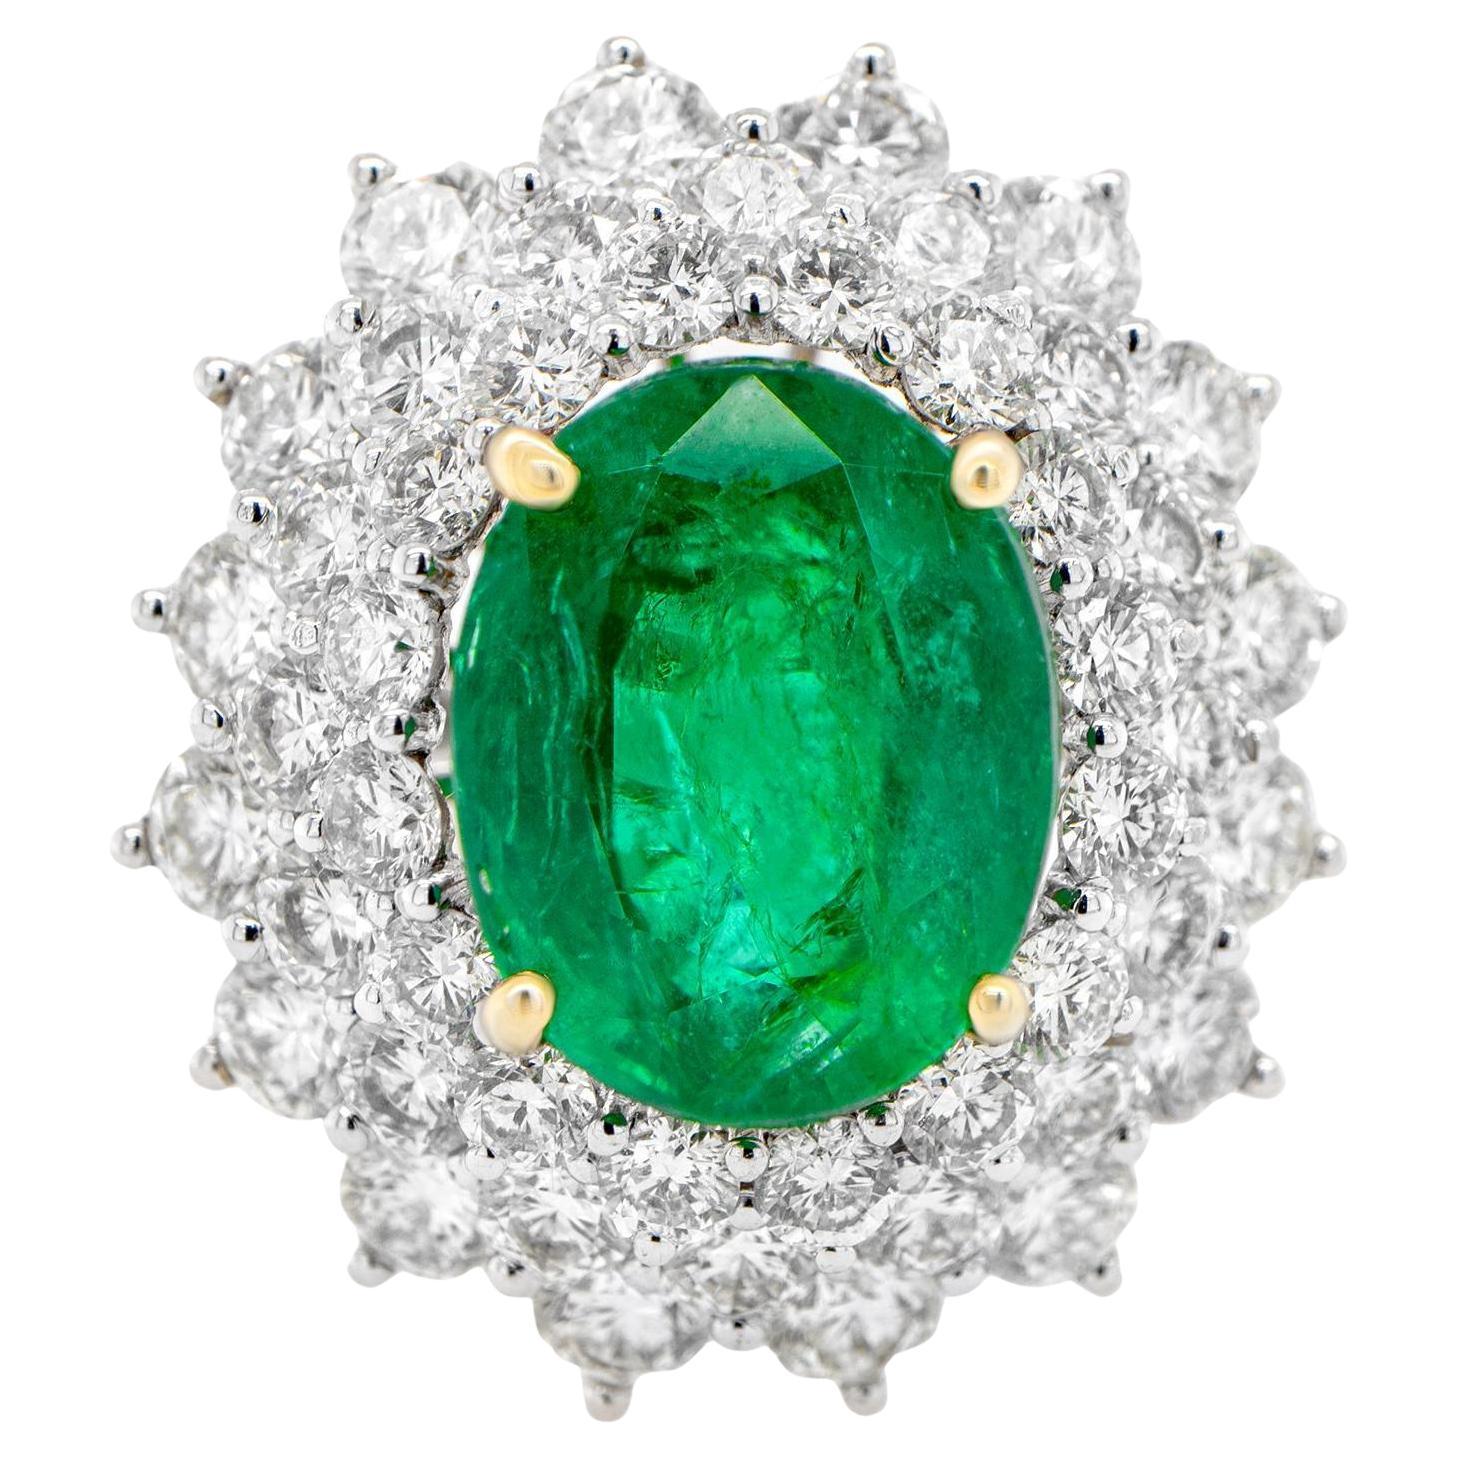 Important Oval Emerald Ring With Diamond Double Halo 12 Carats 18K Gold